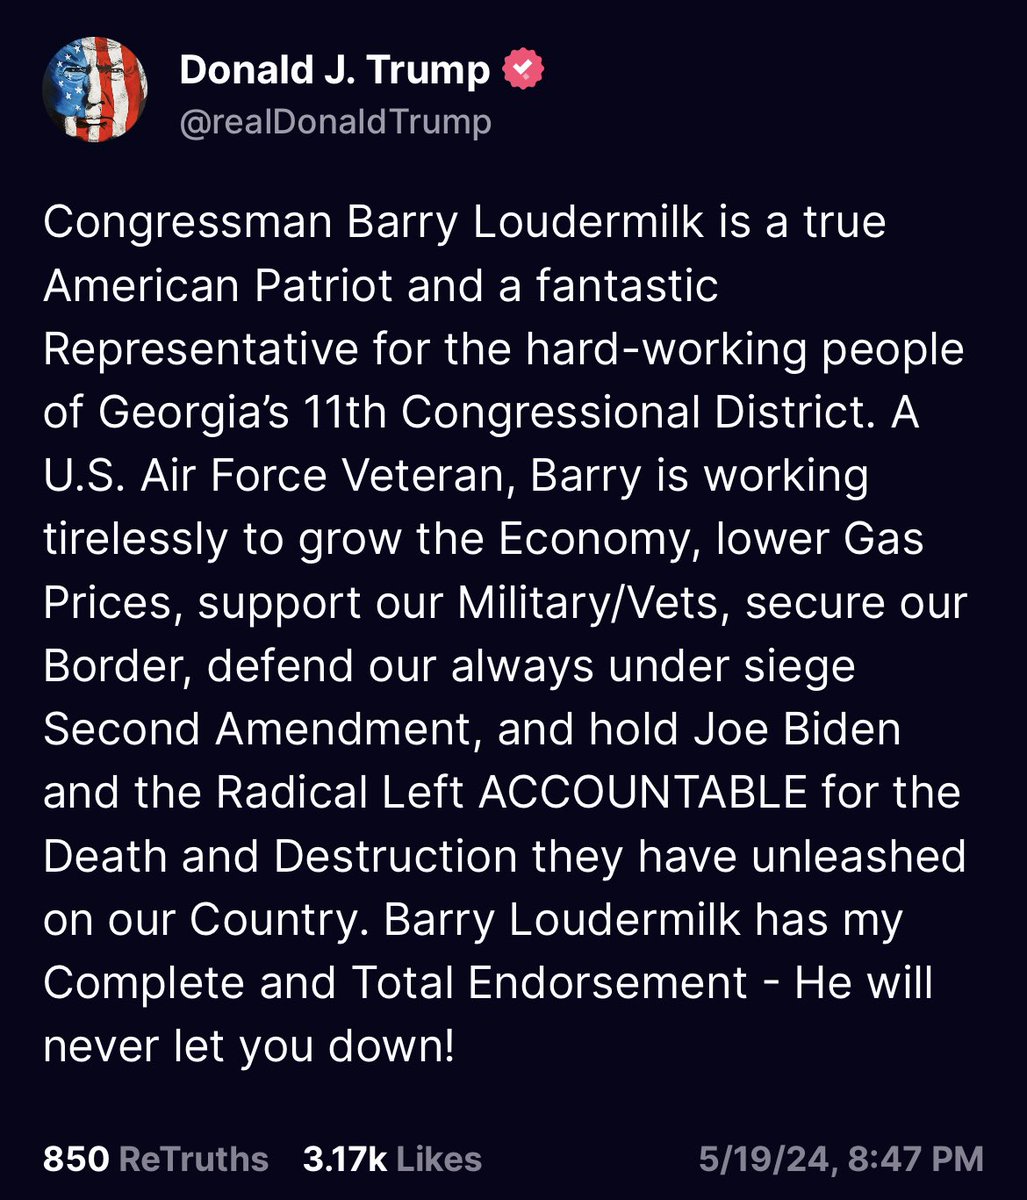 Congressman Barry Loudermilk is a true American Patriot and a fantastic Representative for the hard-working people of Georgia’s 11th Congressional District. A U.S. Air Force Veteran, Barry is working tirelessly to grow the Economy, lower Gas Prices, support our Military/Vets,